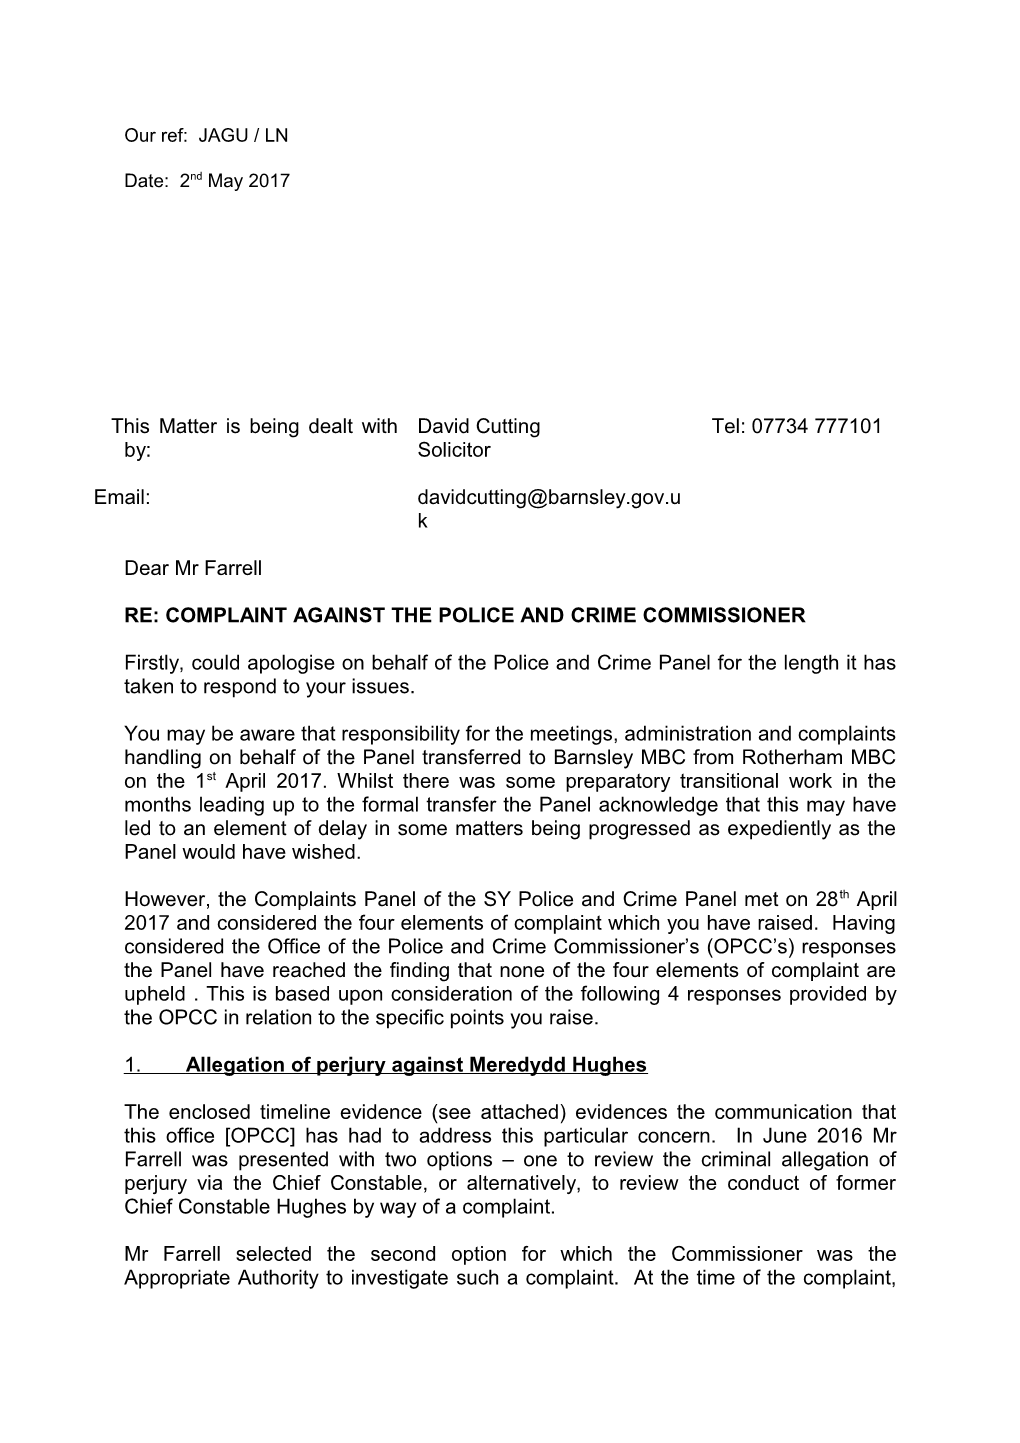 Re: Complaint Against the Police and Crime Commissioner